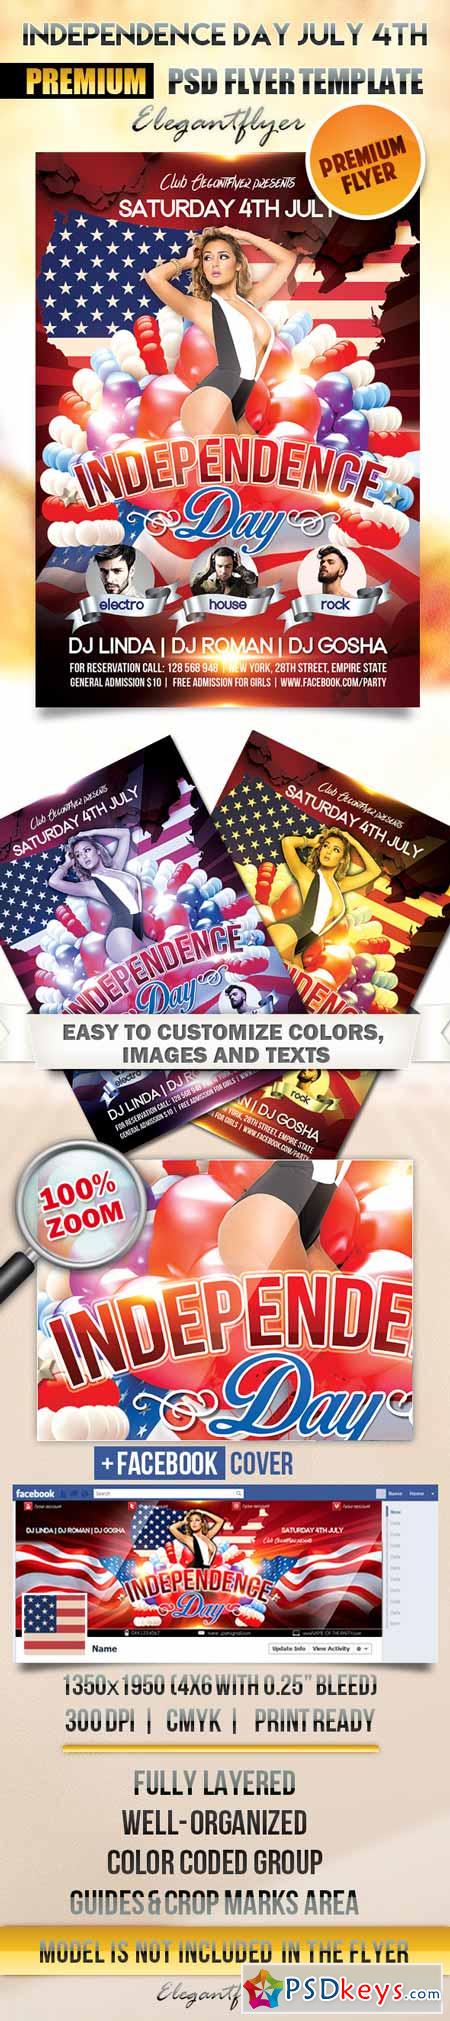 Independence Day Flyer July 4th – Flyer PSD Template + Facebook Cover